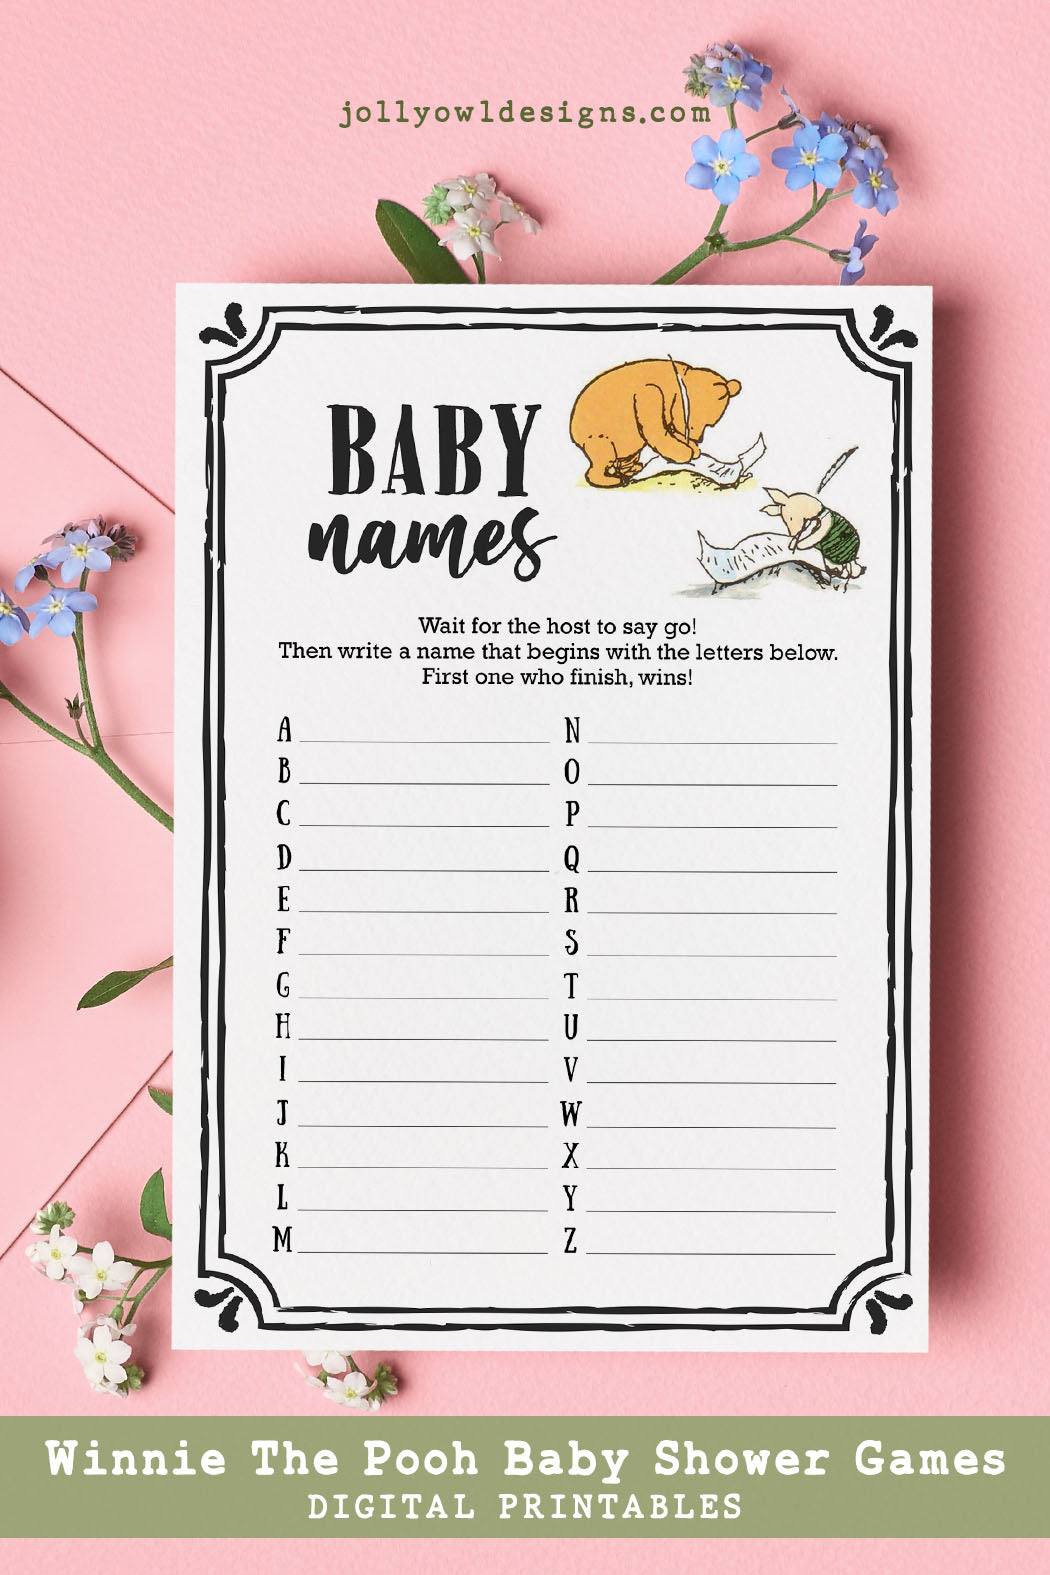 Classic Winnie The Pooh Baby Shower Game Card - Baby Name Game